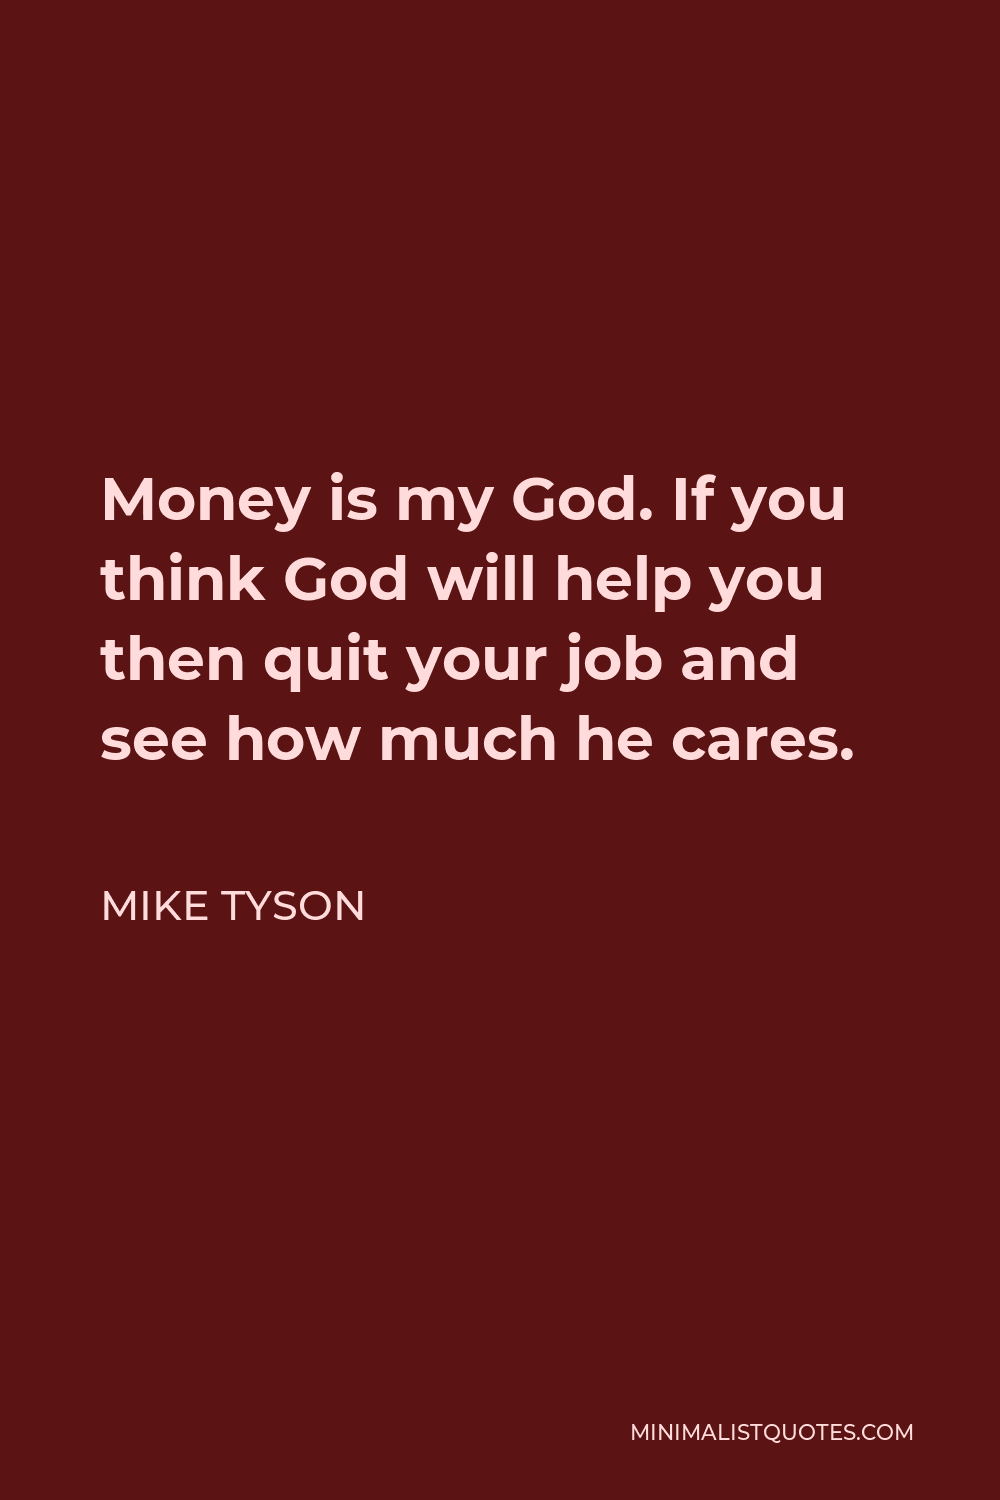 Mike Tyson Quote - Money is my God. If you think God will help you then quit your job and see how much he cares.